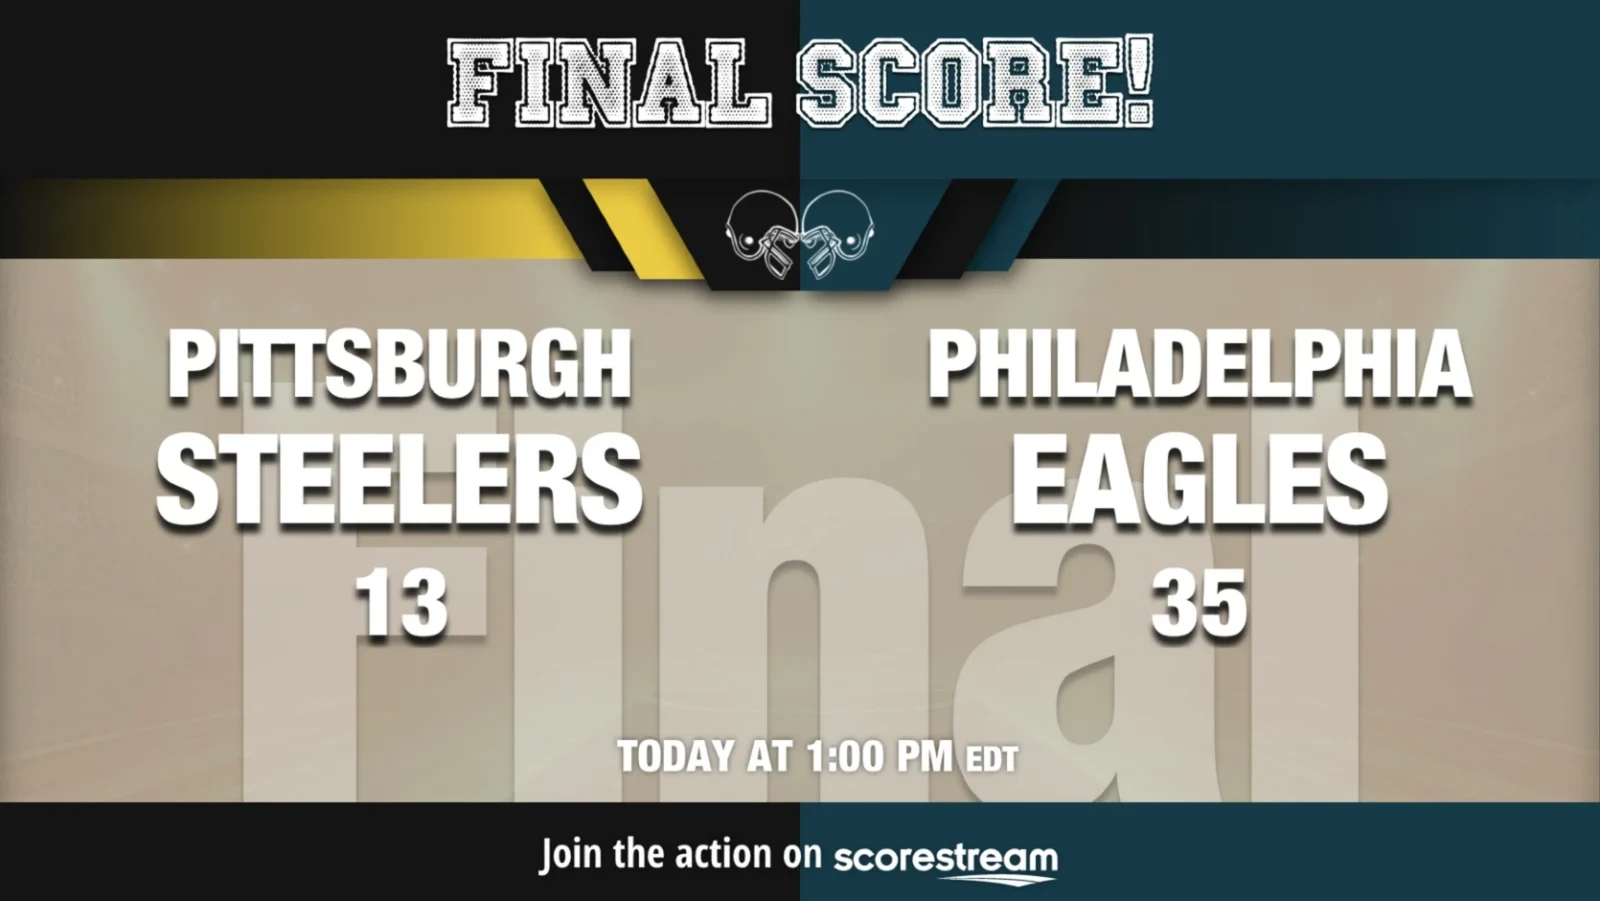 Philadelphia Eagles top Pittsburgh Steelers 35-13, improved to 7-0; video highlights